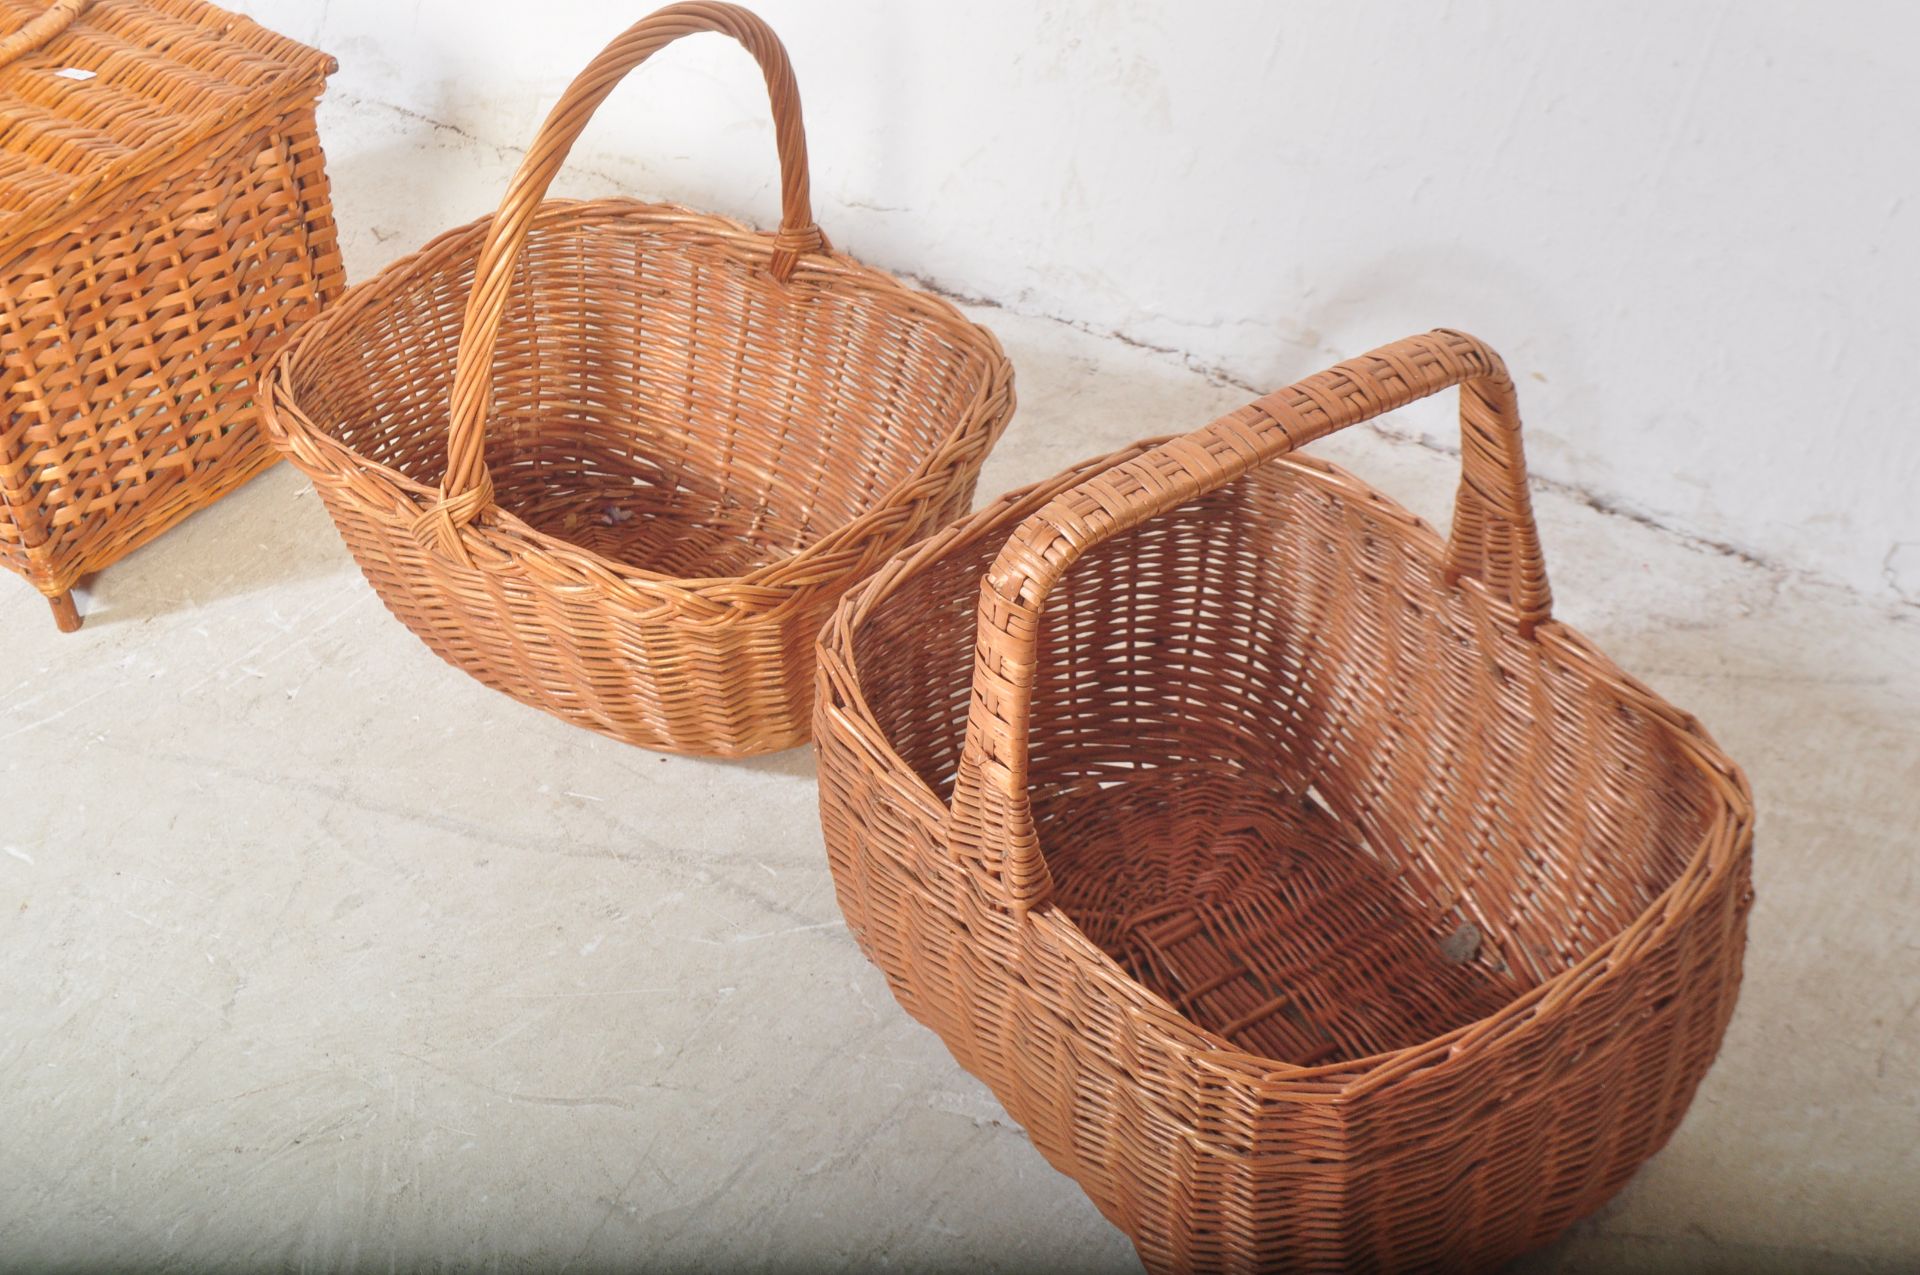 SET OF FOUR VINTAGE WICKER RATTAN PICNIC BASKETS - Image 5 of 5